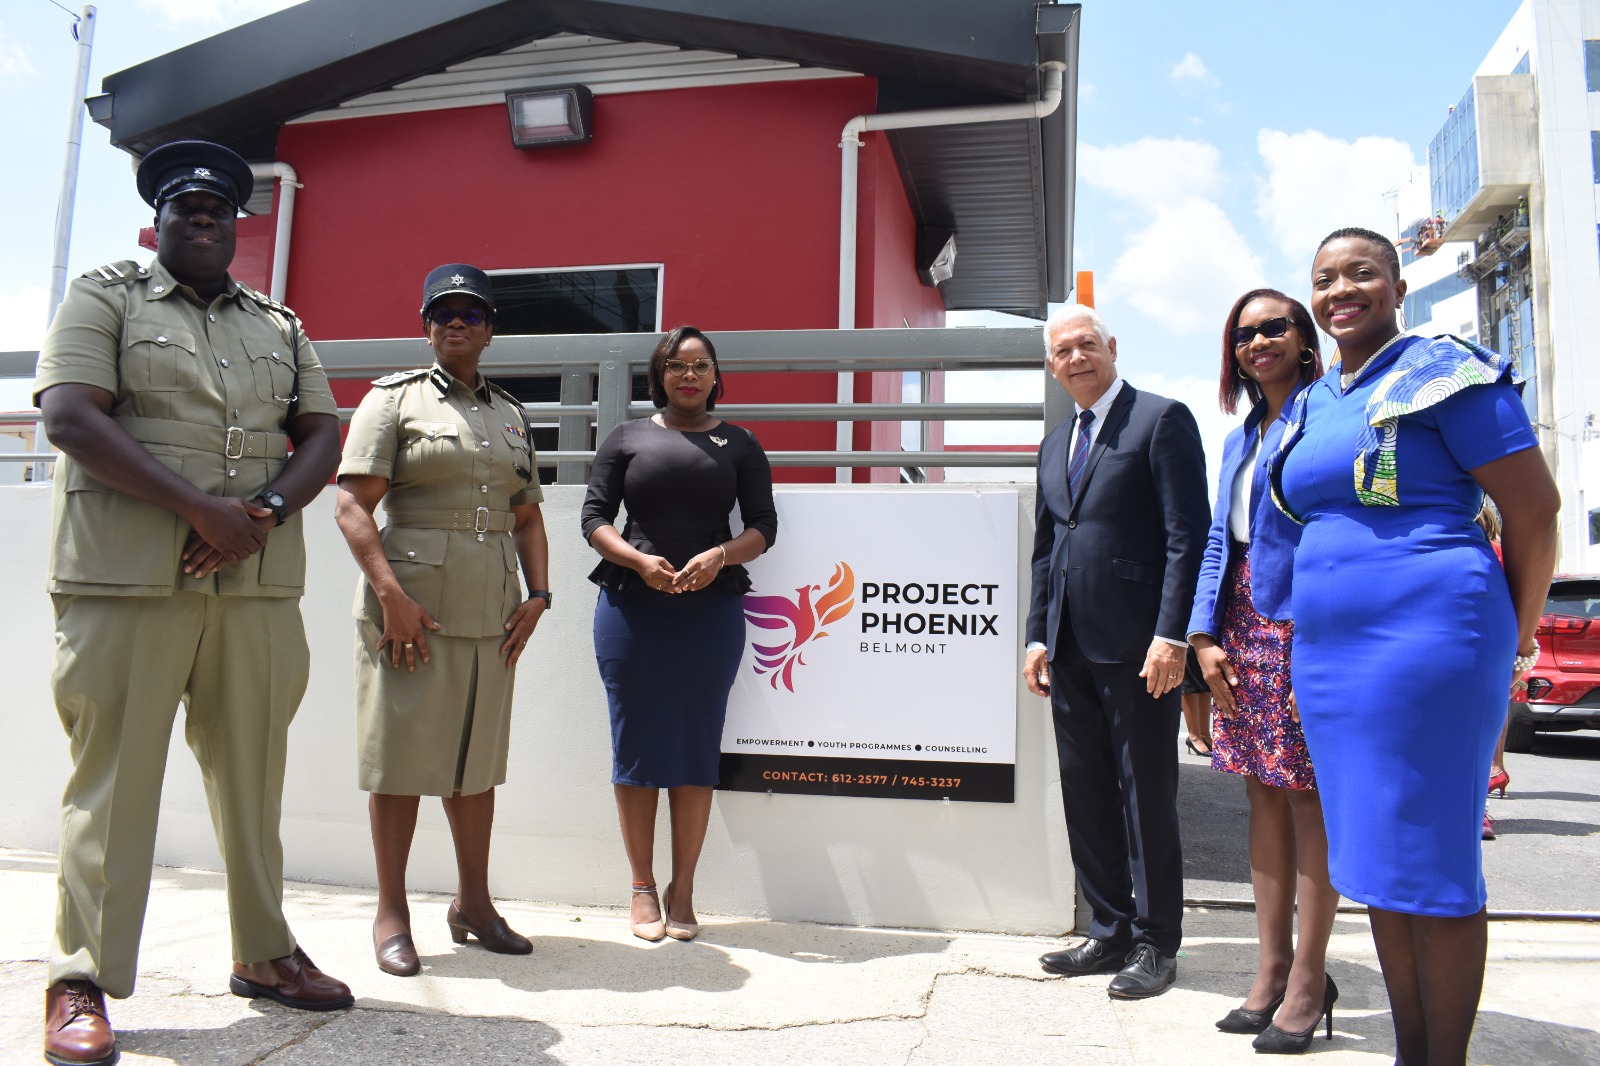 Project Phoenix to provide Belmont residents with free counselling services and life skills training